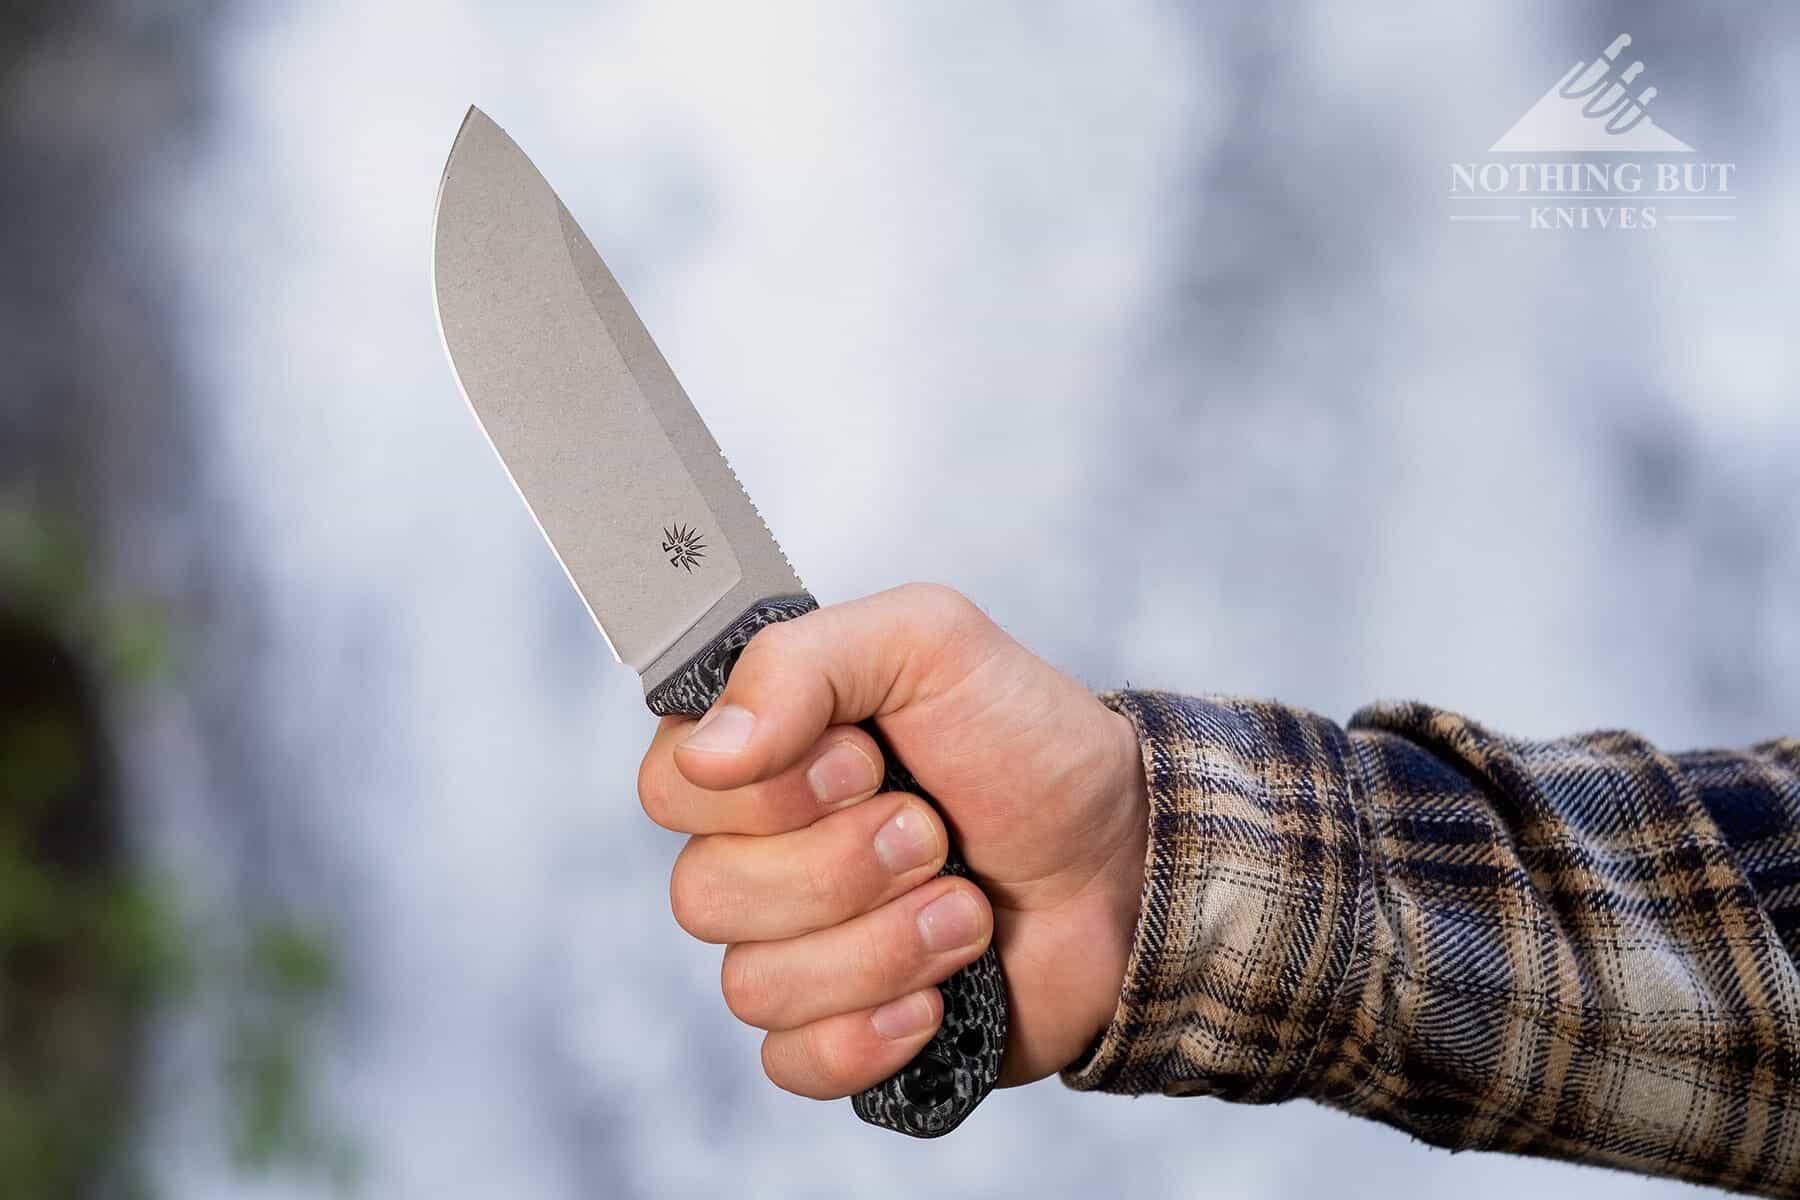 The handle of this knife is big and easy to grip when performing tough tasks.